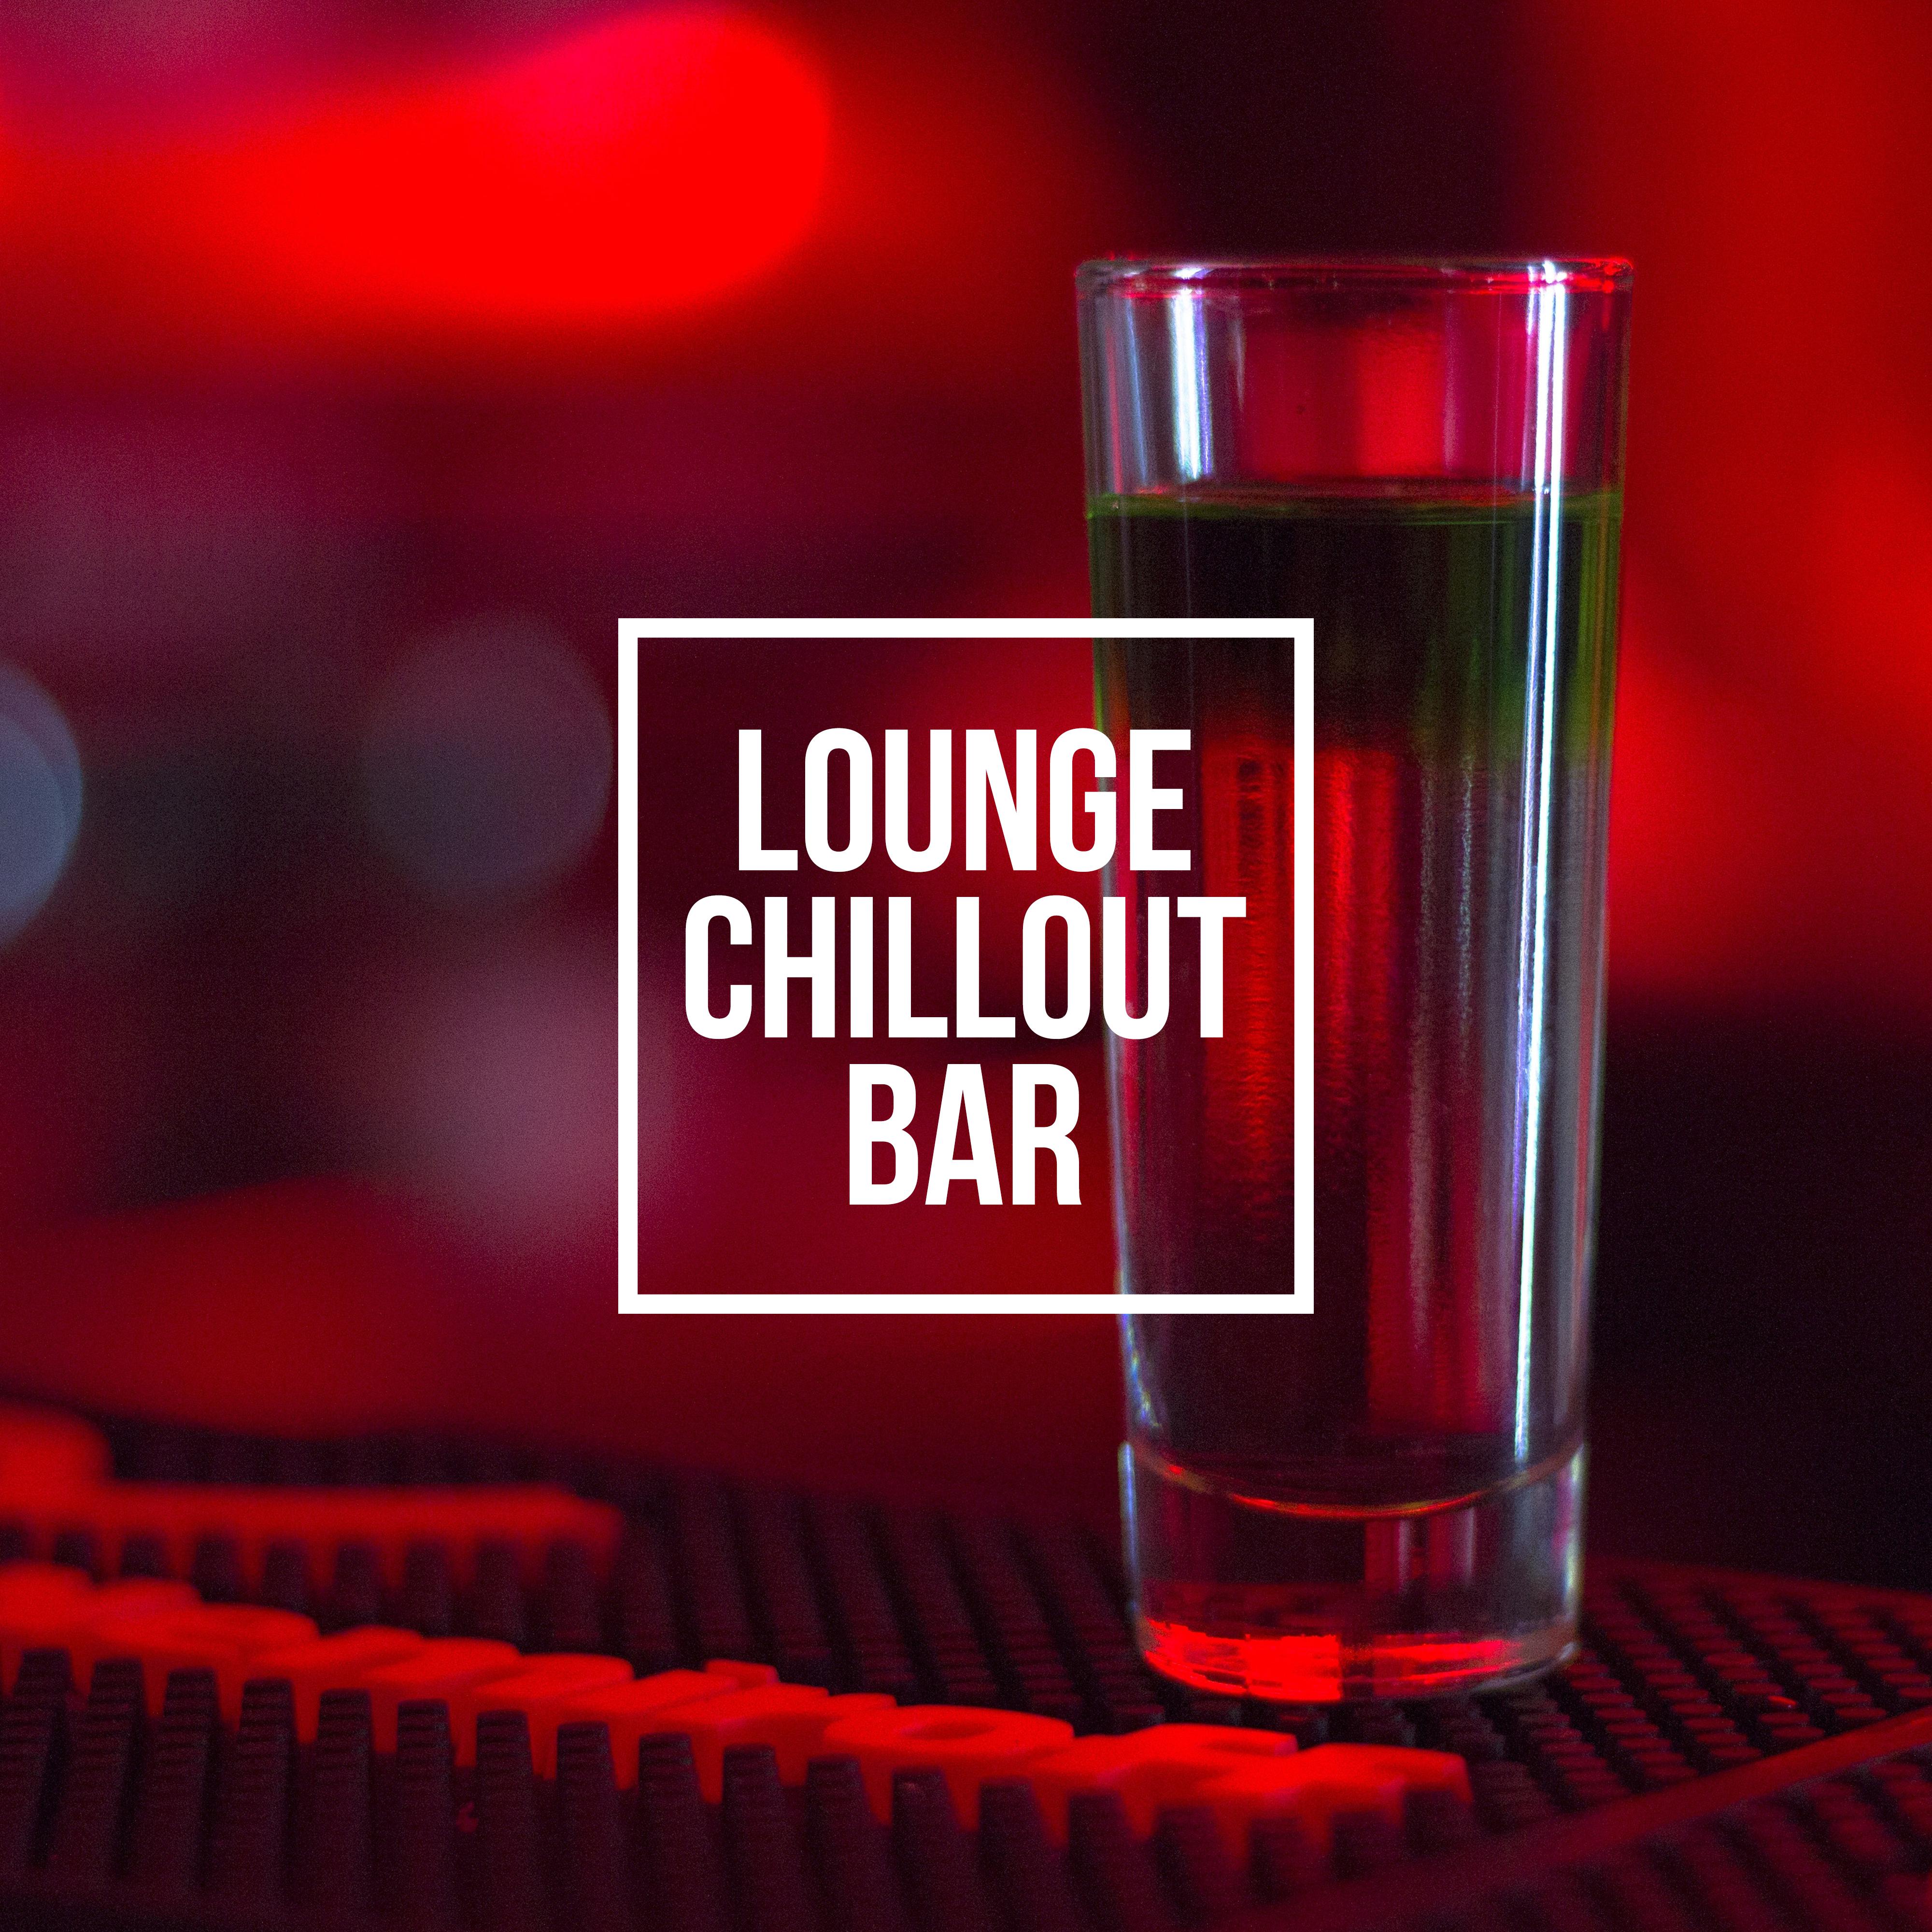 Lounge Chillout Bar: Chillout Zone, Summertime, Relaxation Music, Deep Relax, Pure Mind, Chilled Ibiza